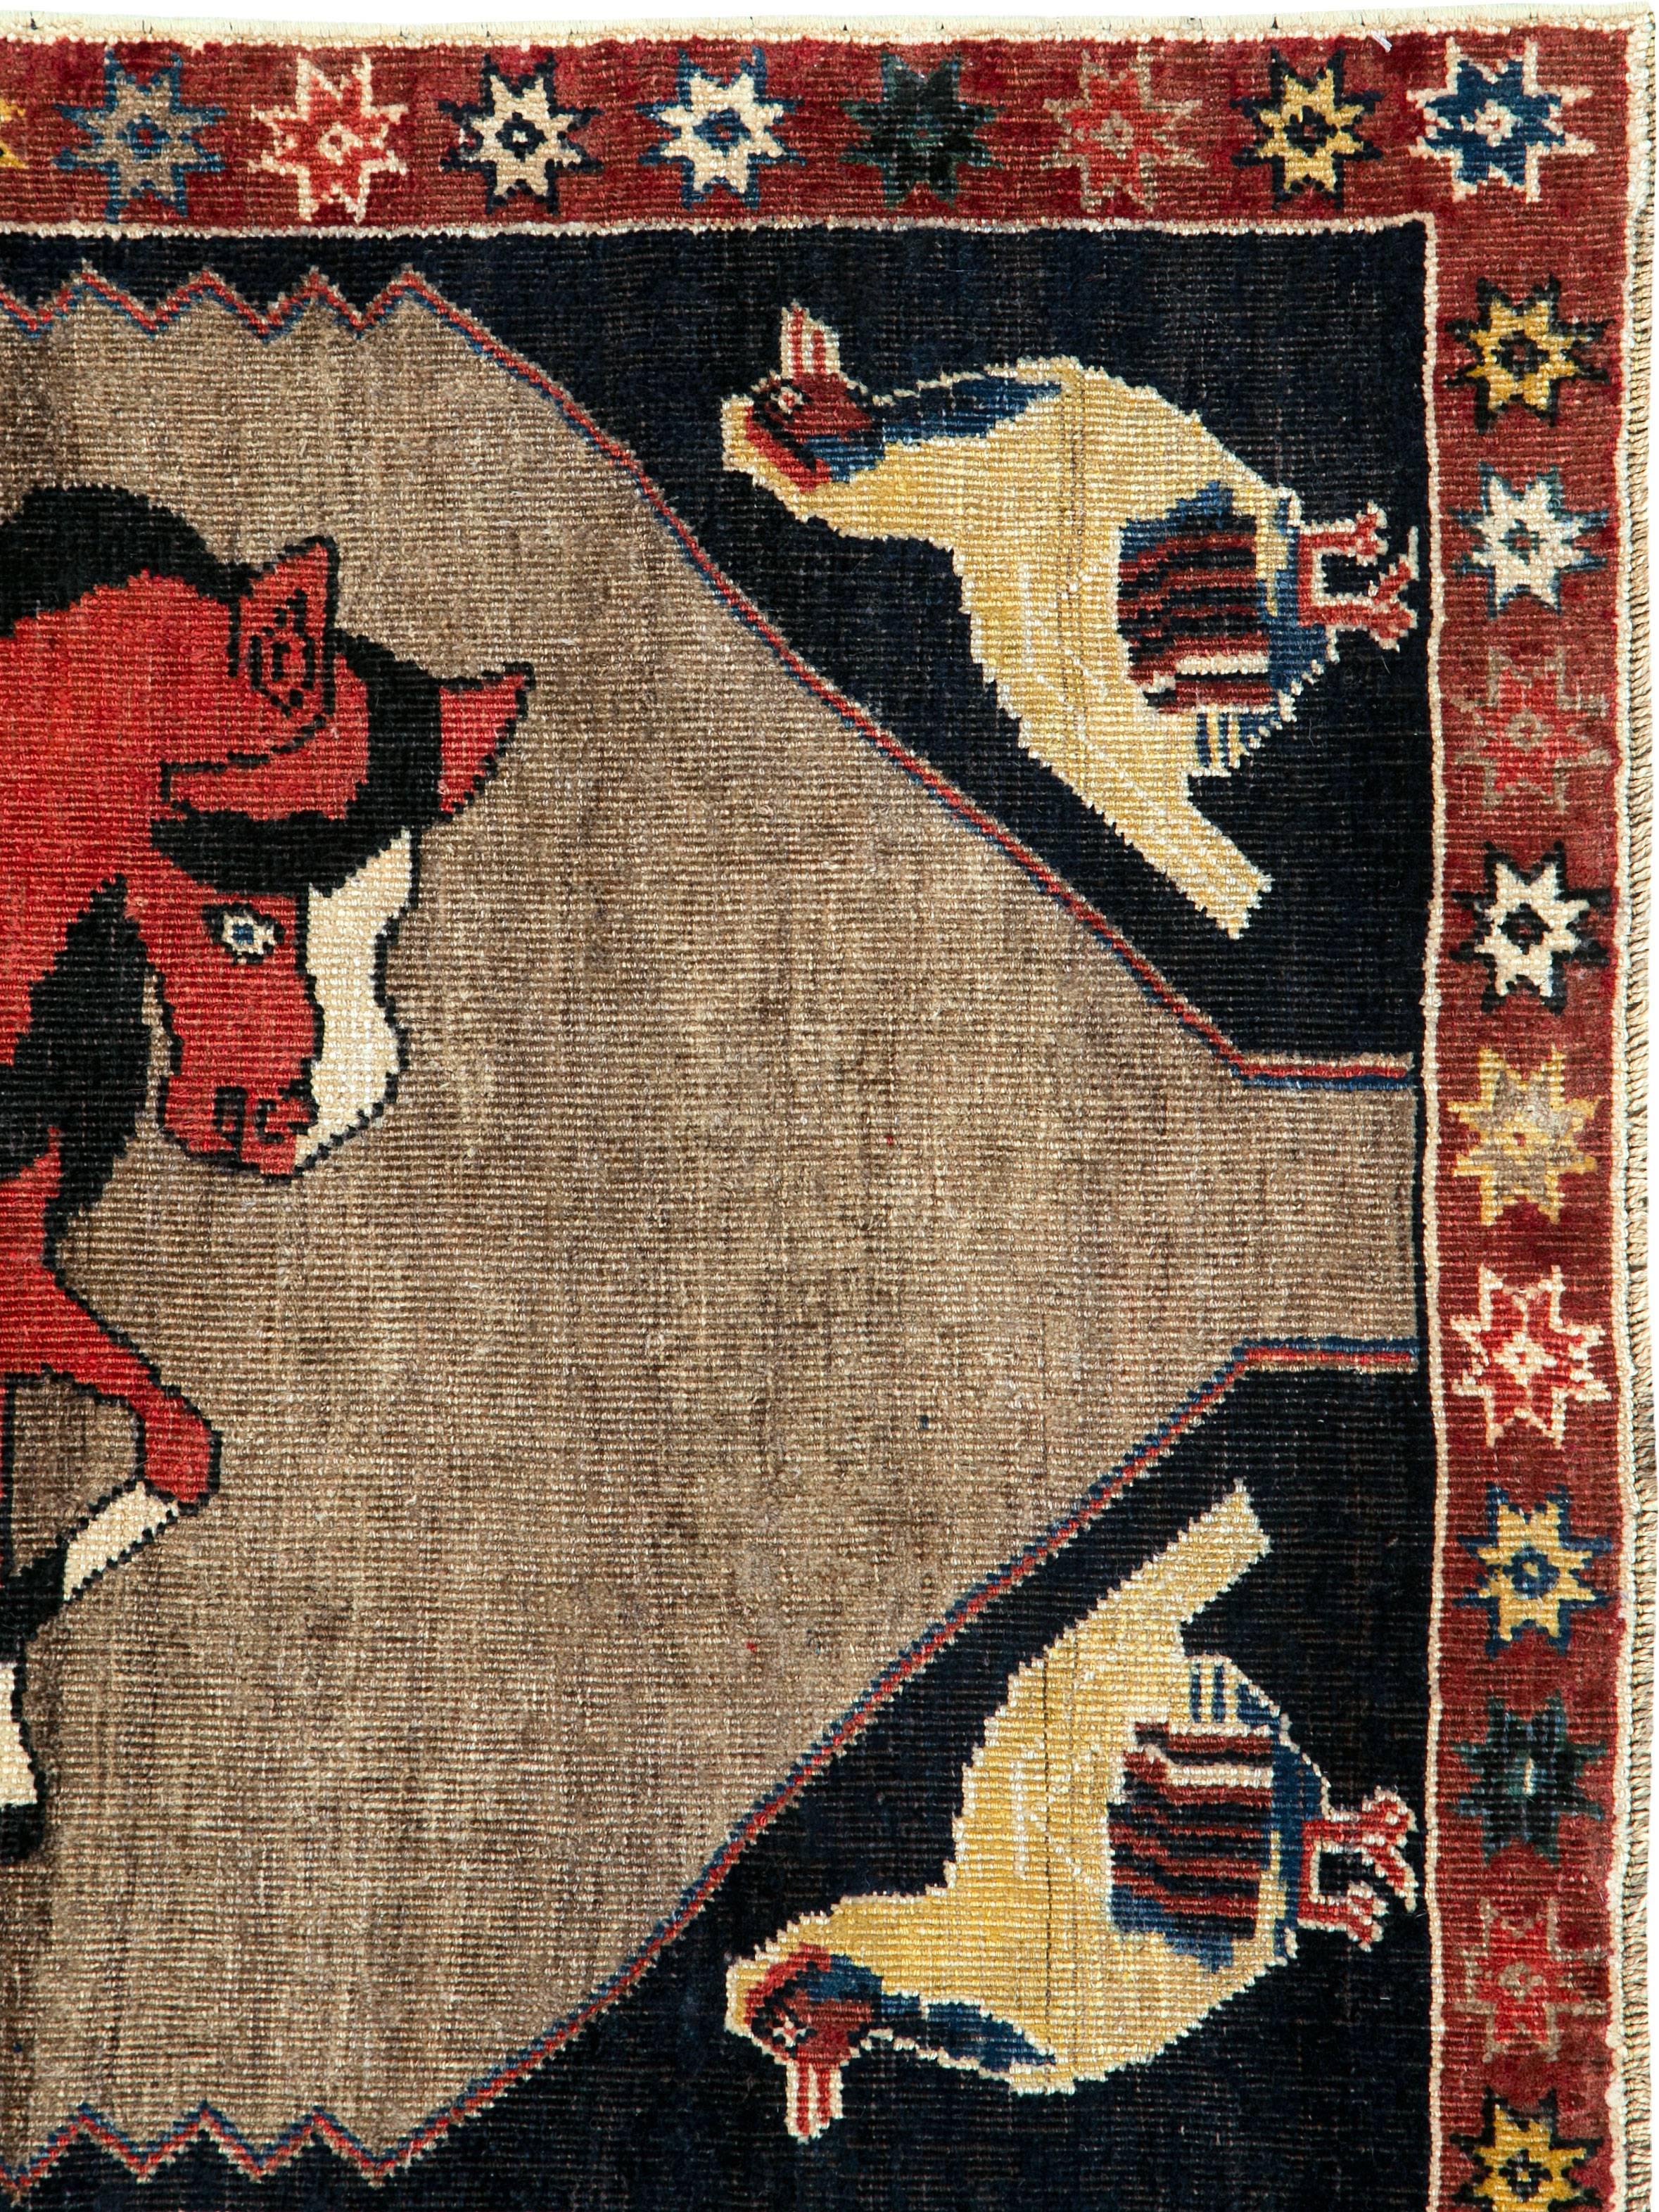 An antique Persian Kurd carpet from the second quarter of the 20th century with a pictorial design.